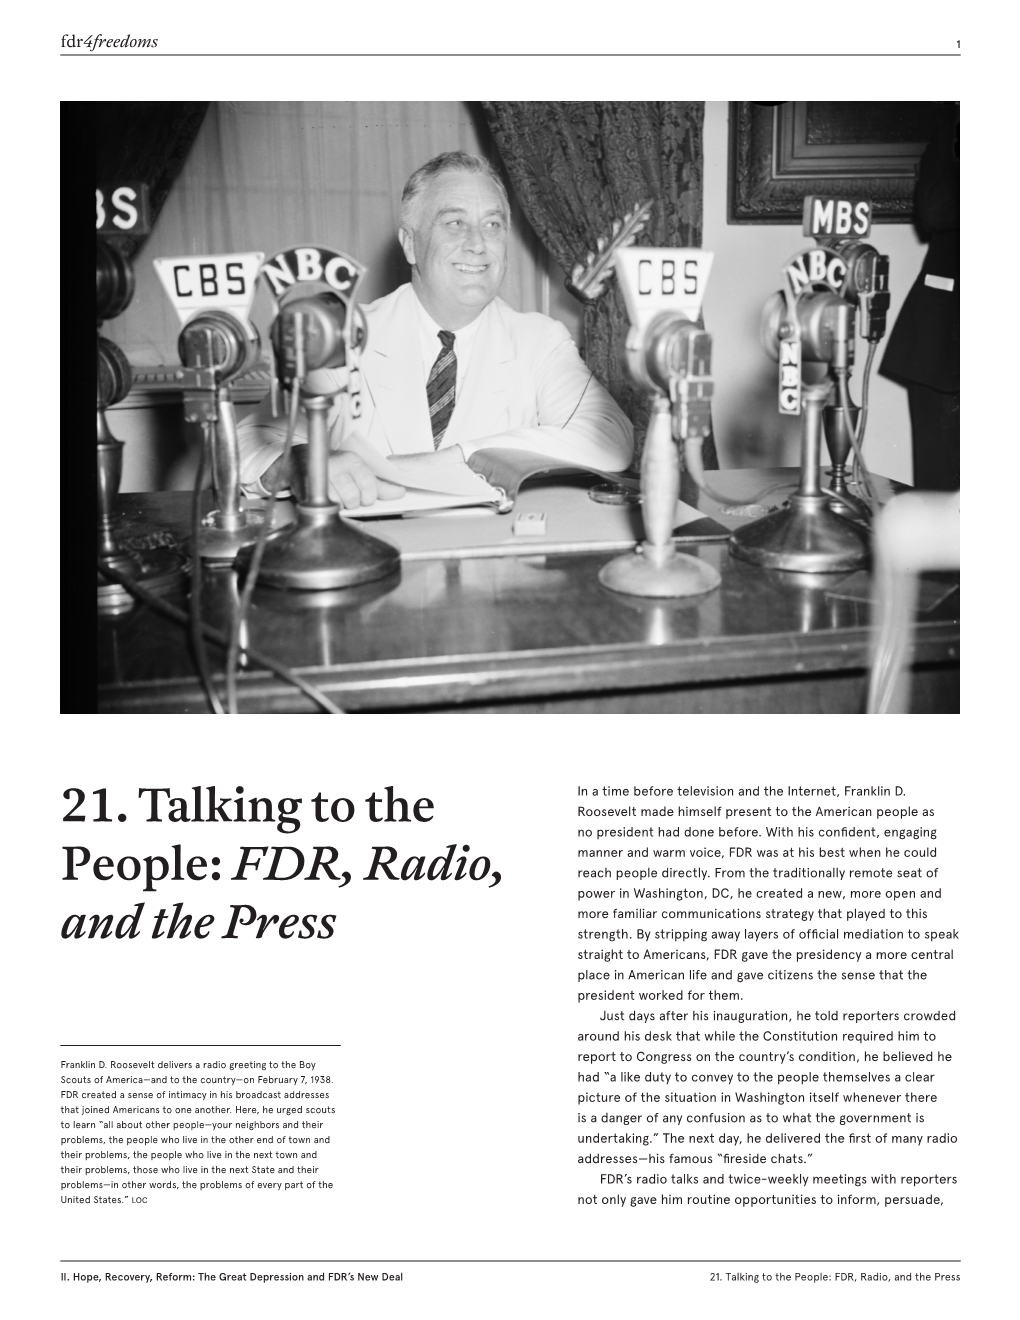 21. Talking to the People: FDR, Radio, and the Press Fdr4freedoms 2